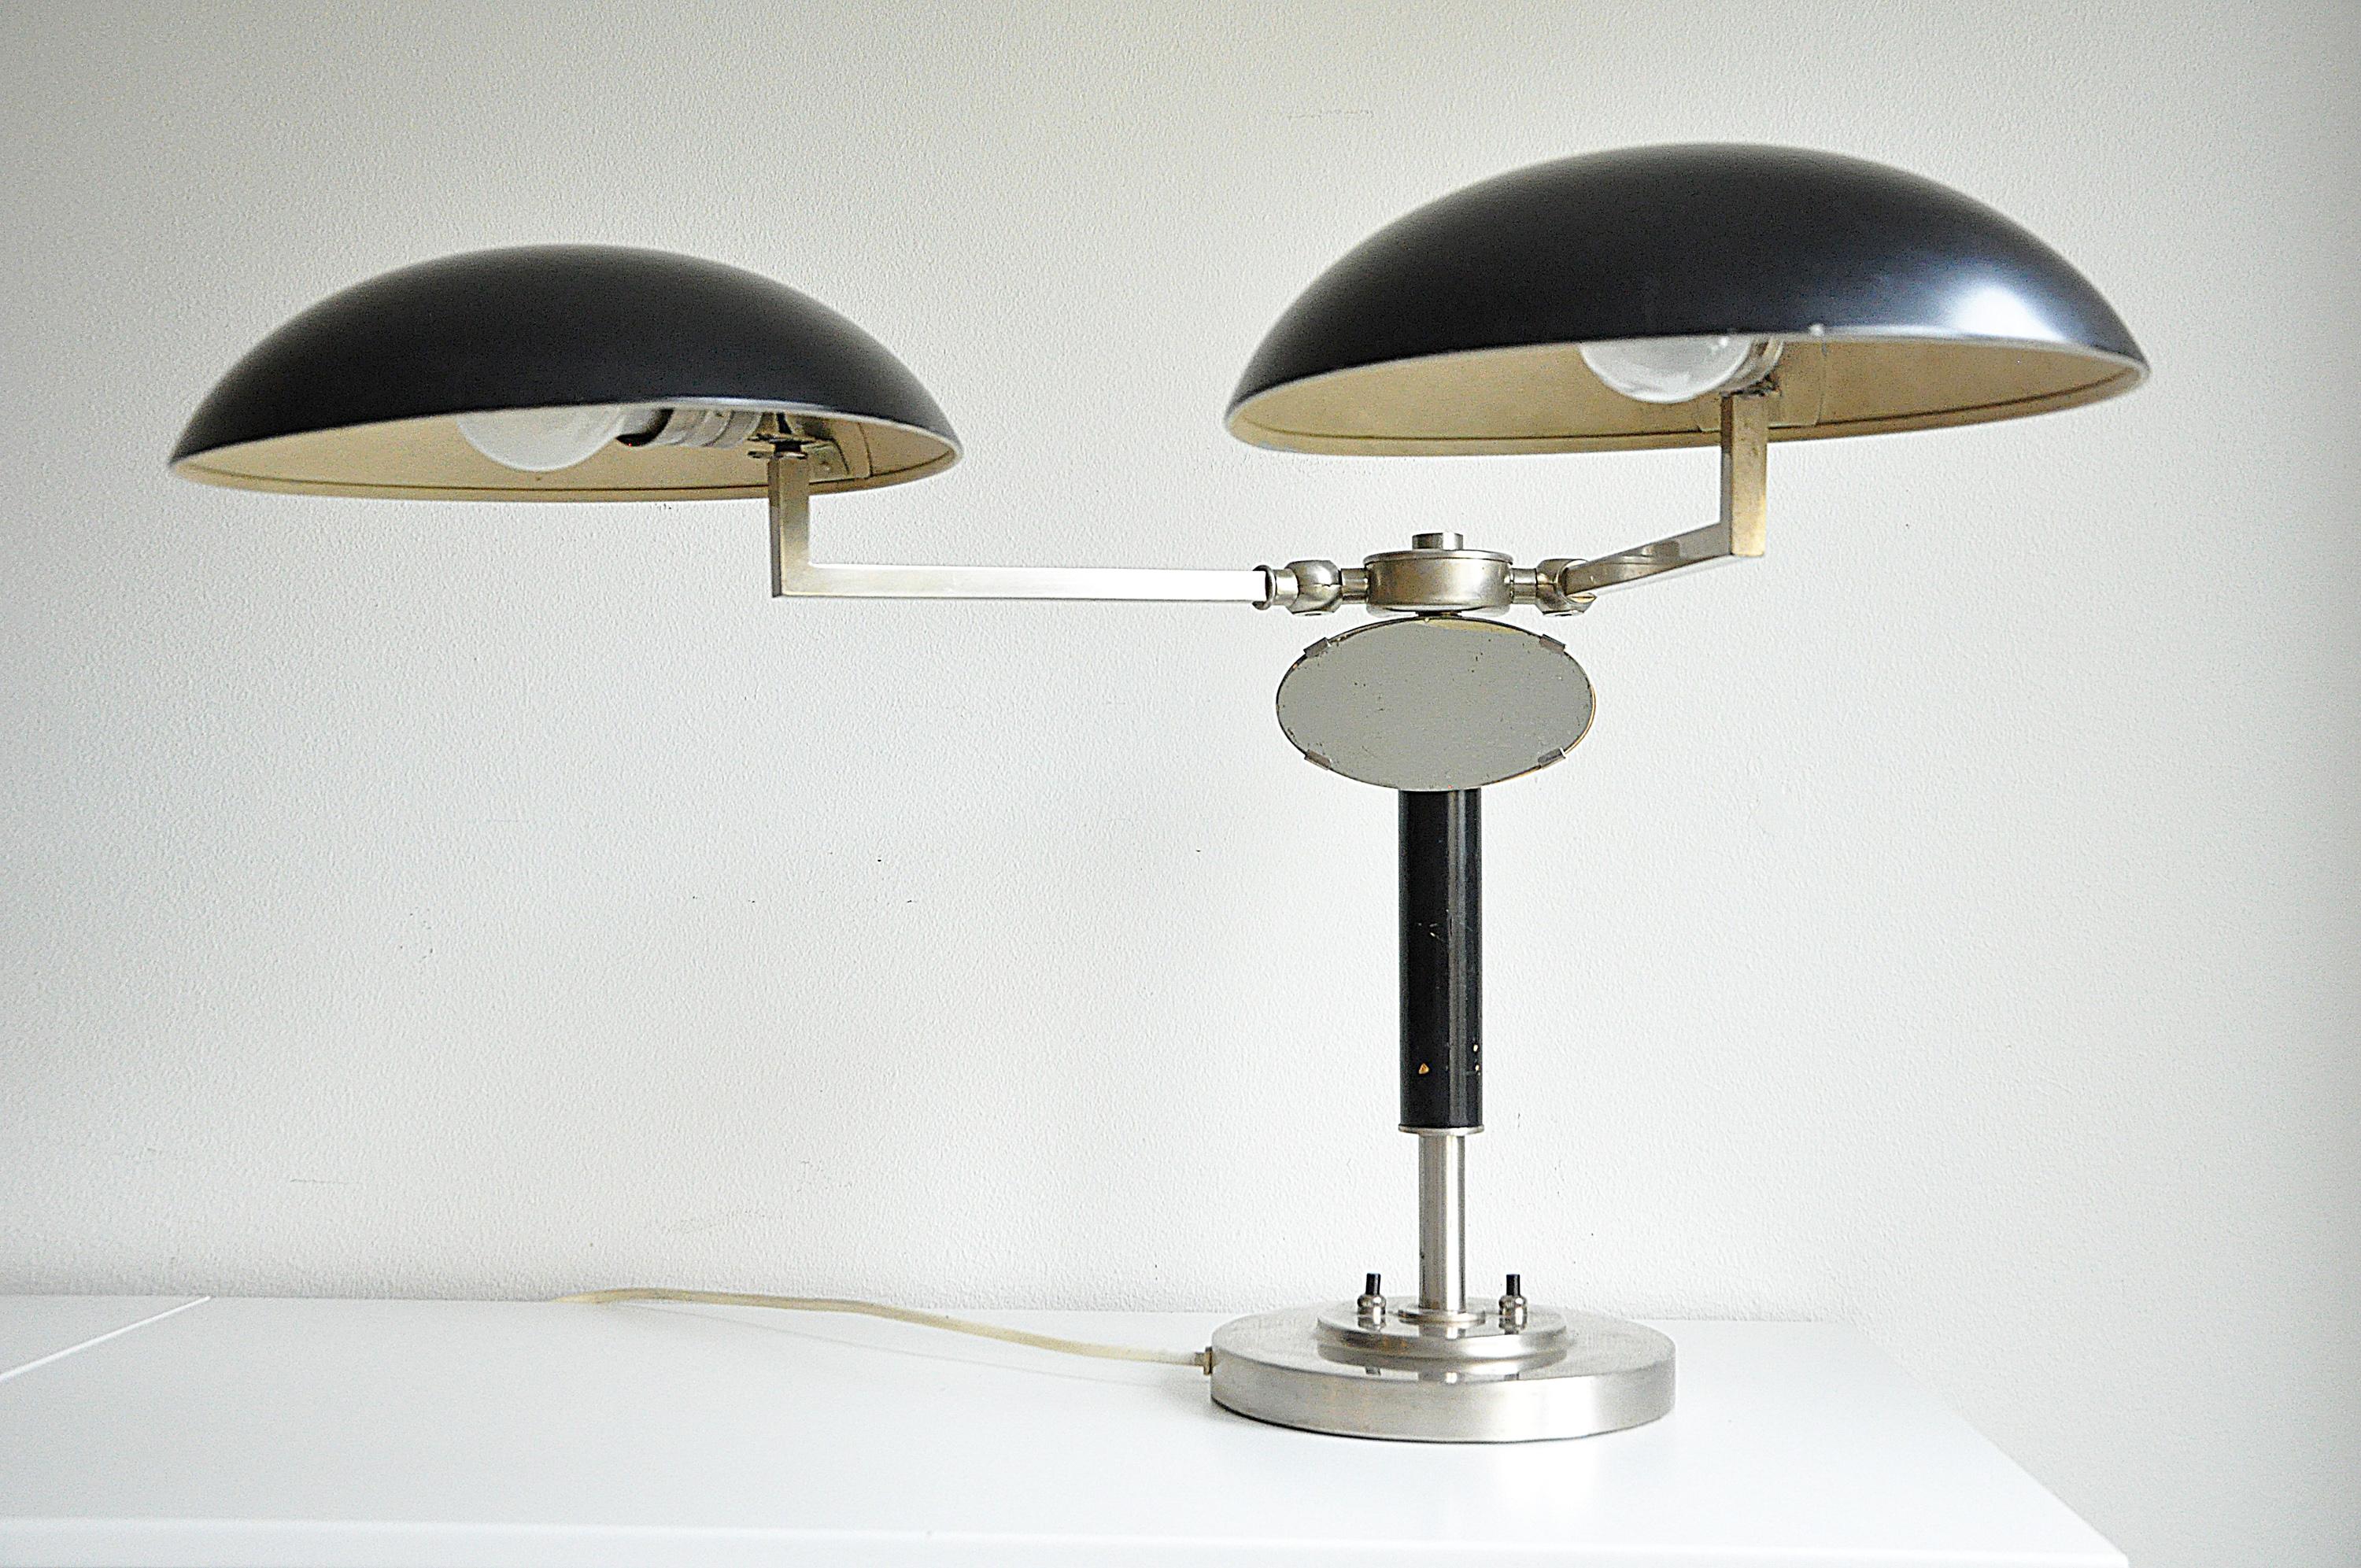 Scandinavian Modern Two-Arm Table Lamp with a Small Mirror, 1930s For Sale